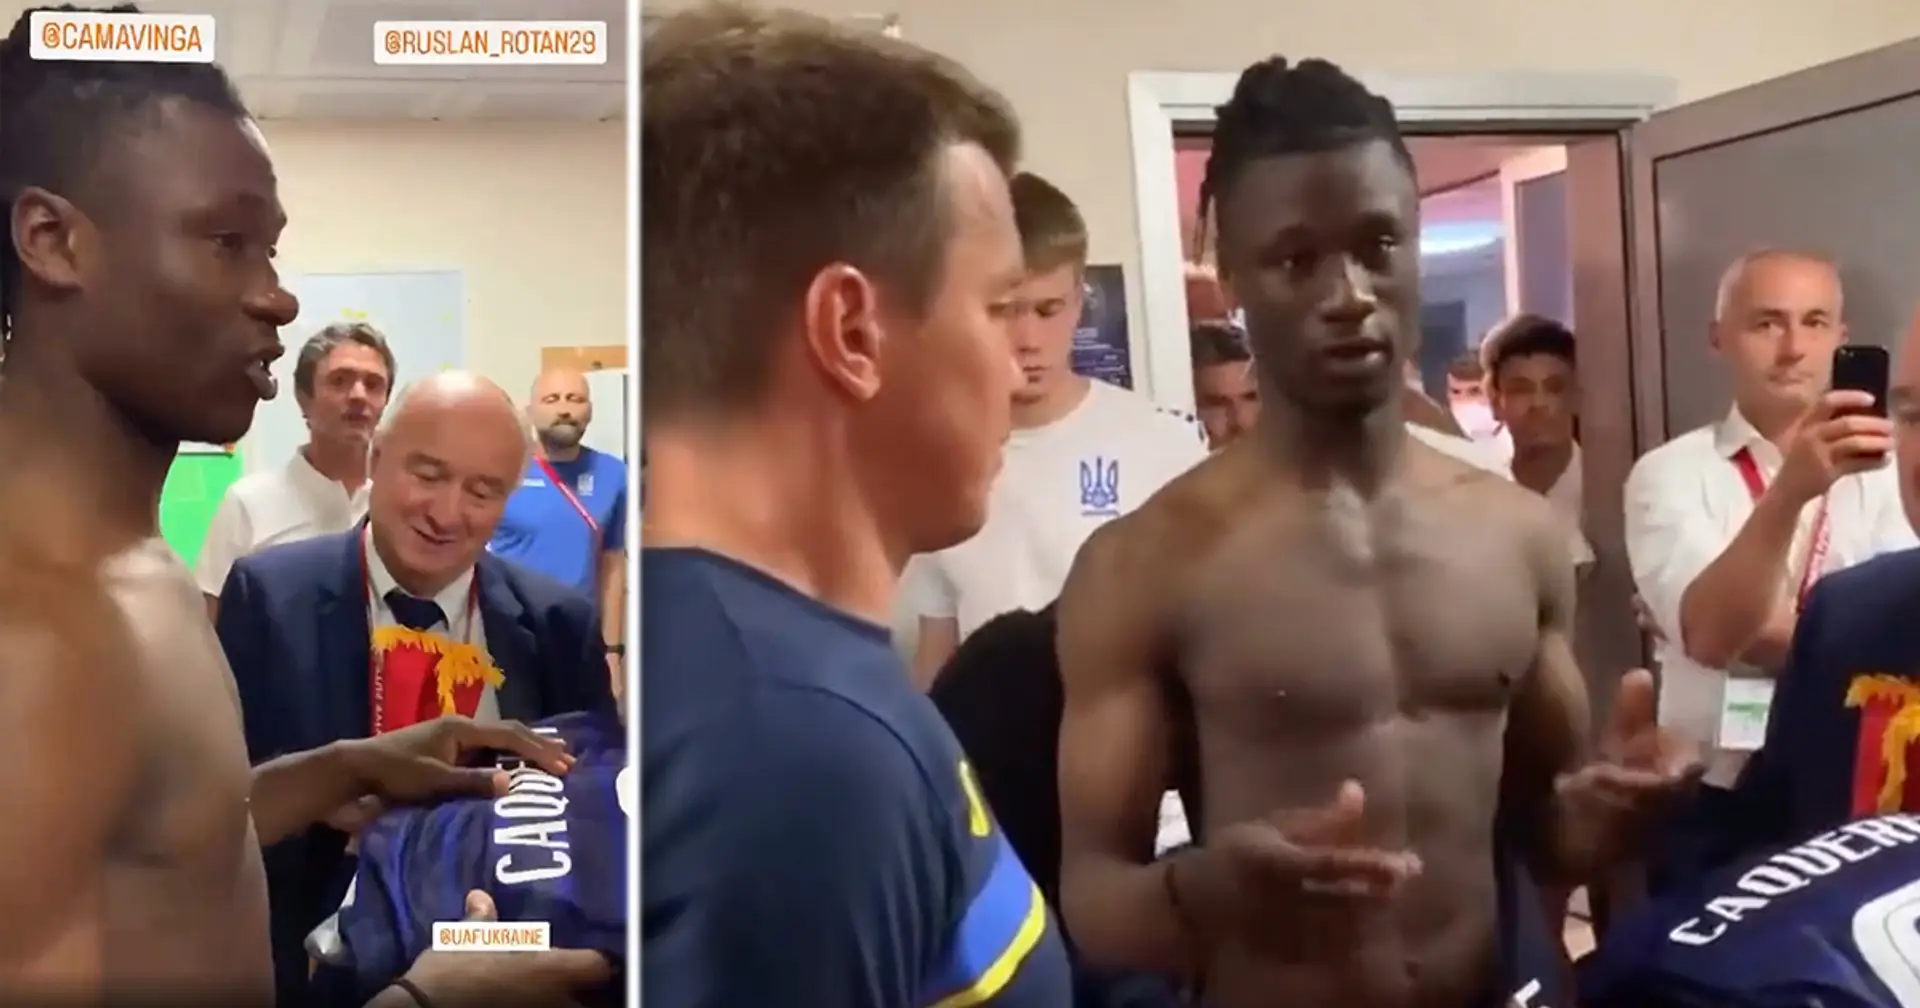 'We know there's a bad situation these days': Camavinga makes brilliant gesture for Ukraine U21 players